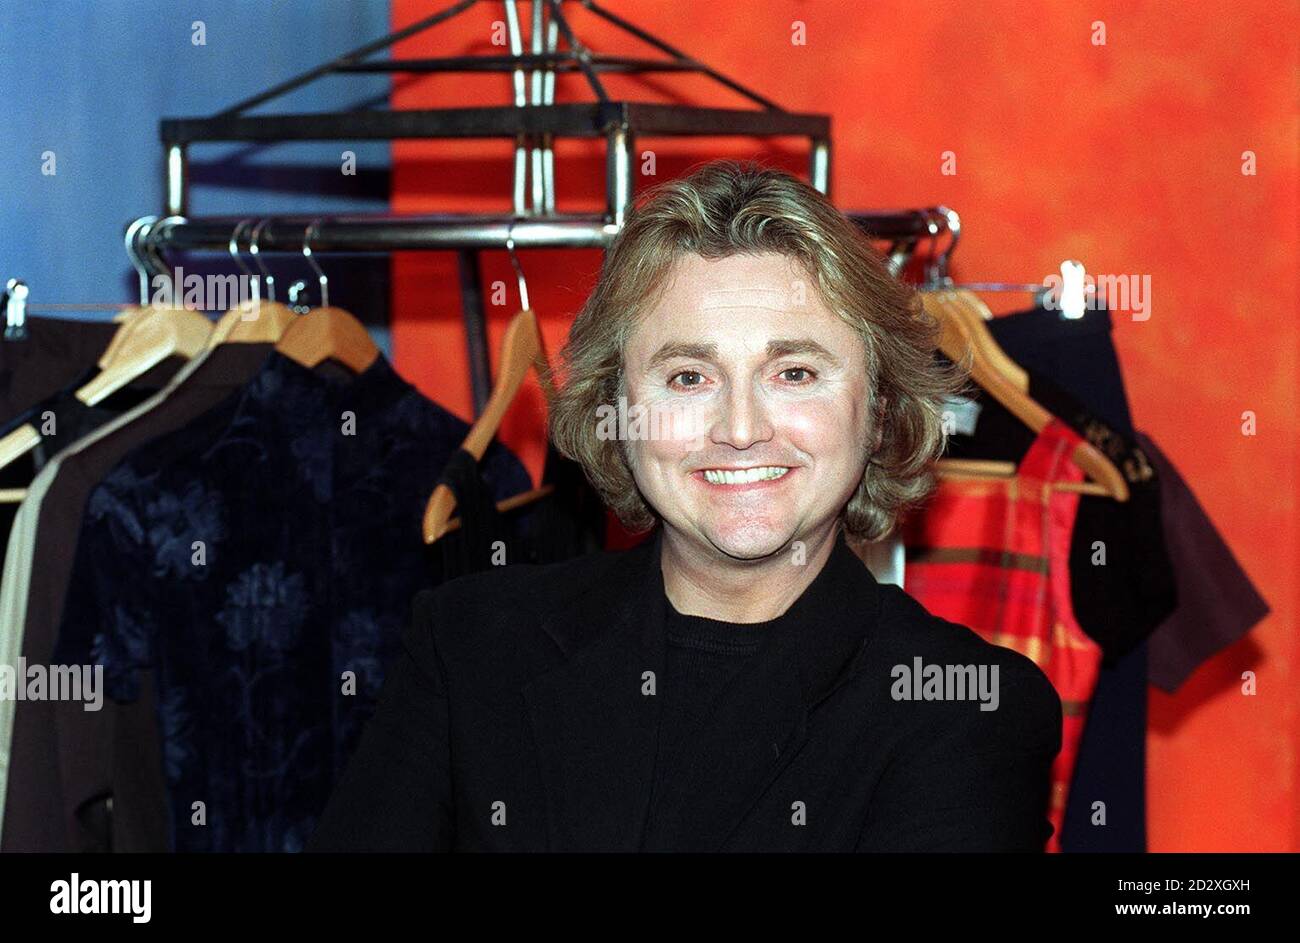 David Emanuel, designer of the dress worn by Diana, Princess of Wales on her wedding day in 1981 at the Carlton TV Studios in London today (Wednesday). It has been reported that the dazzling ivory gown, which stunned the world when it cascaded down the steps of St Paul's Cathedral in 1981, will go on permanent public display at the Victoria & Albert Museum later this summer. Photo by Rebecca Naden/PA. See PA Stroy ROYAL Diana Stock Photo